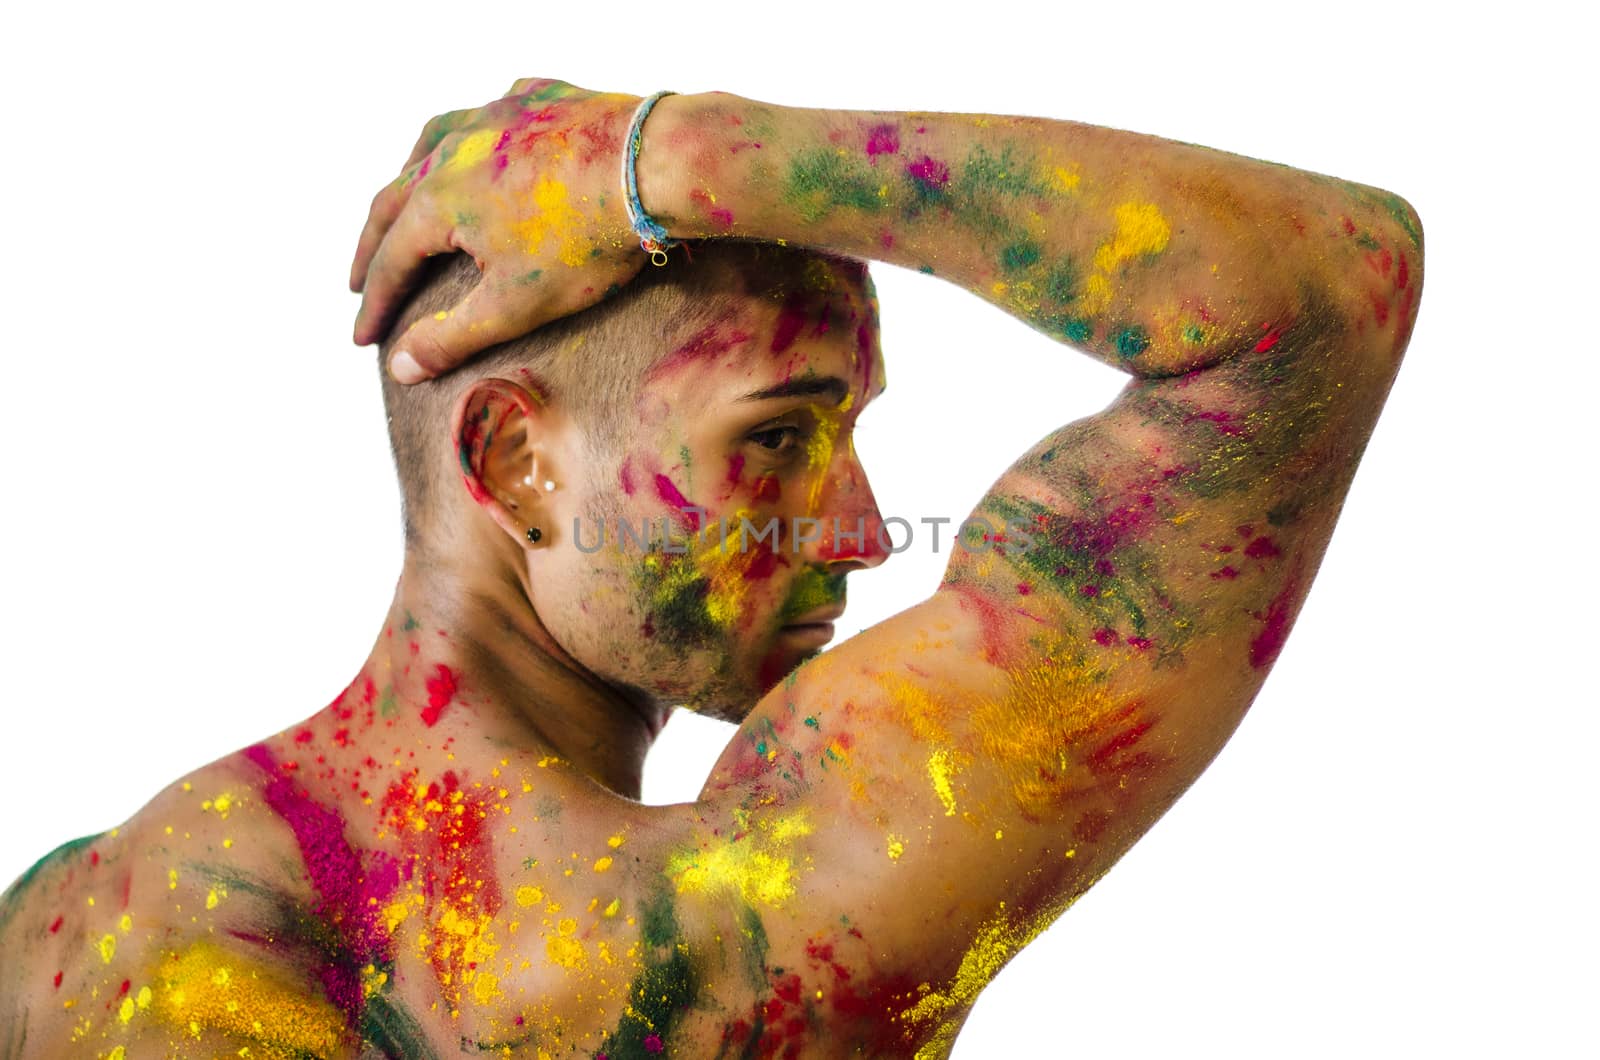 Back of shirtless young man, skin painted all over with bright Holi colors by artofphoto